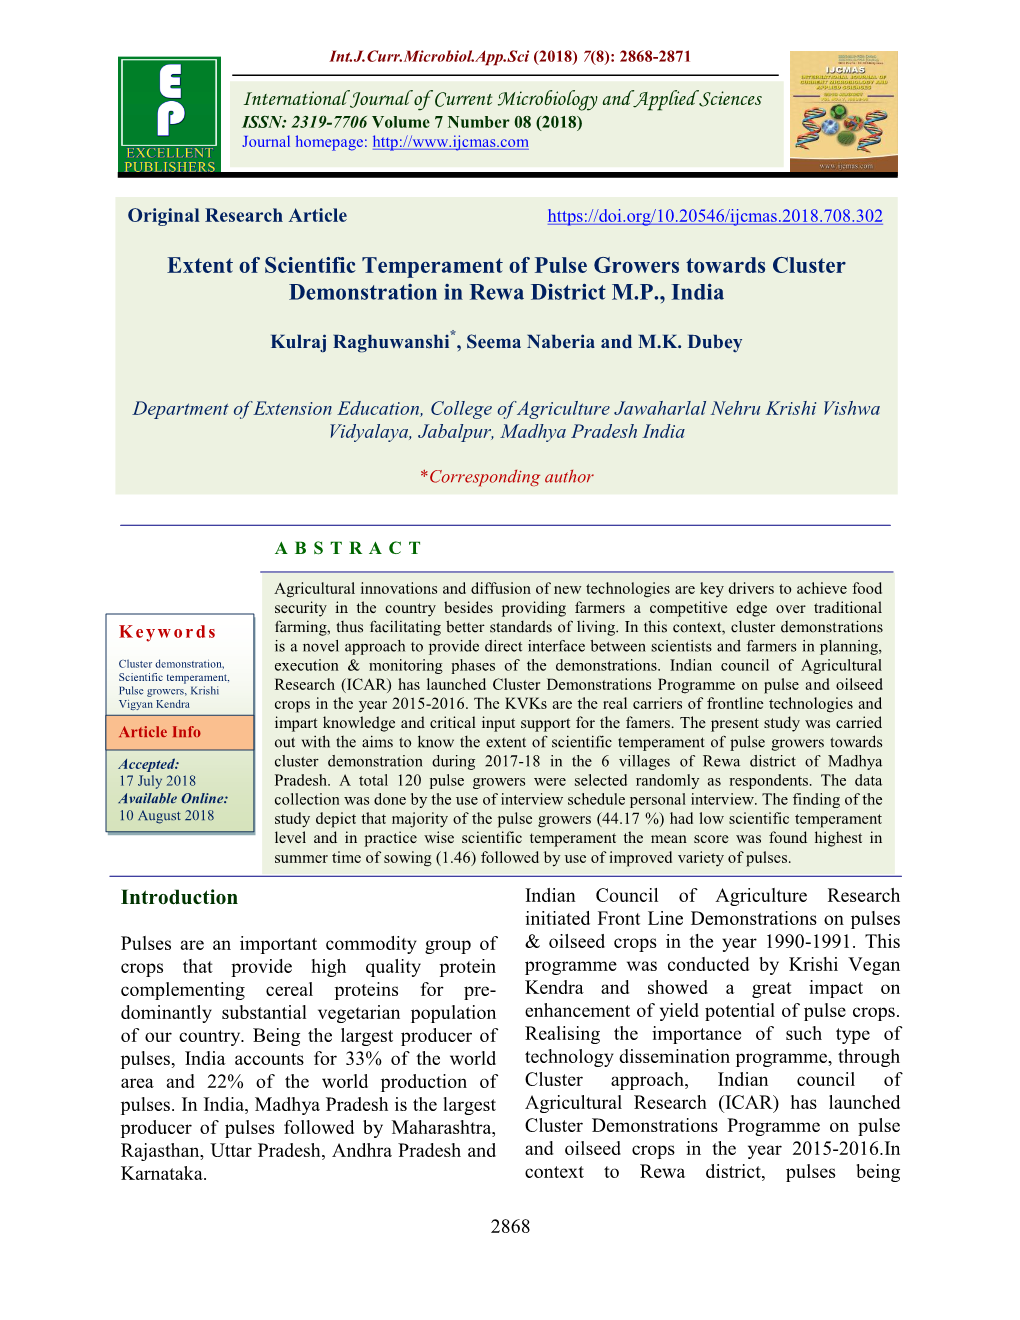 Extent of Scientific Temperament of Pulse Growers Towards Cluster Demonstration in Rewa District M.P., India